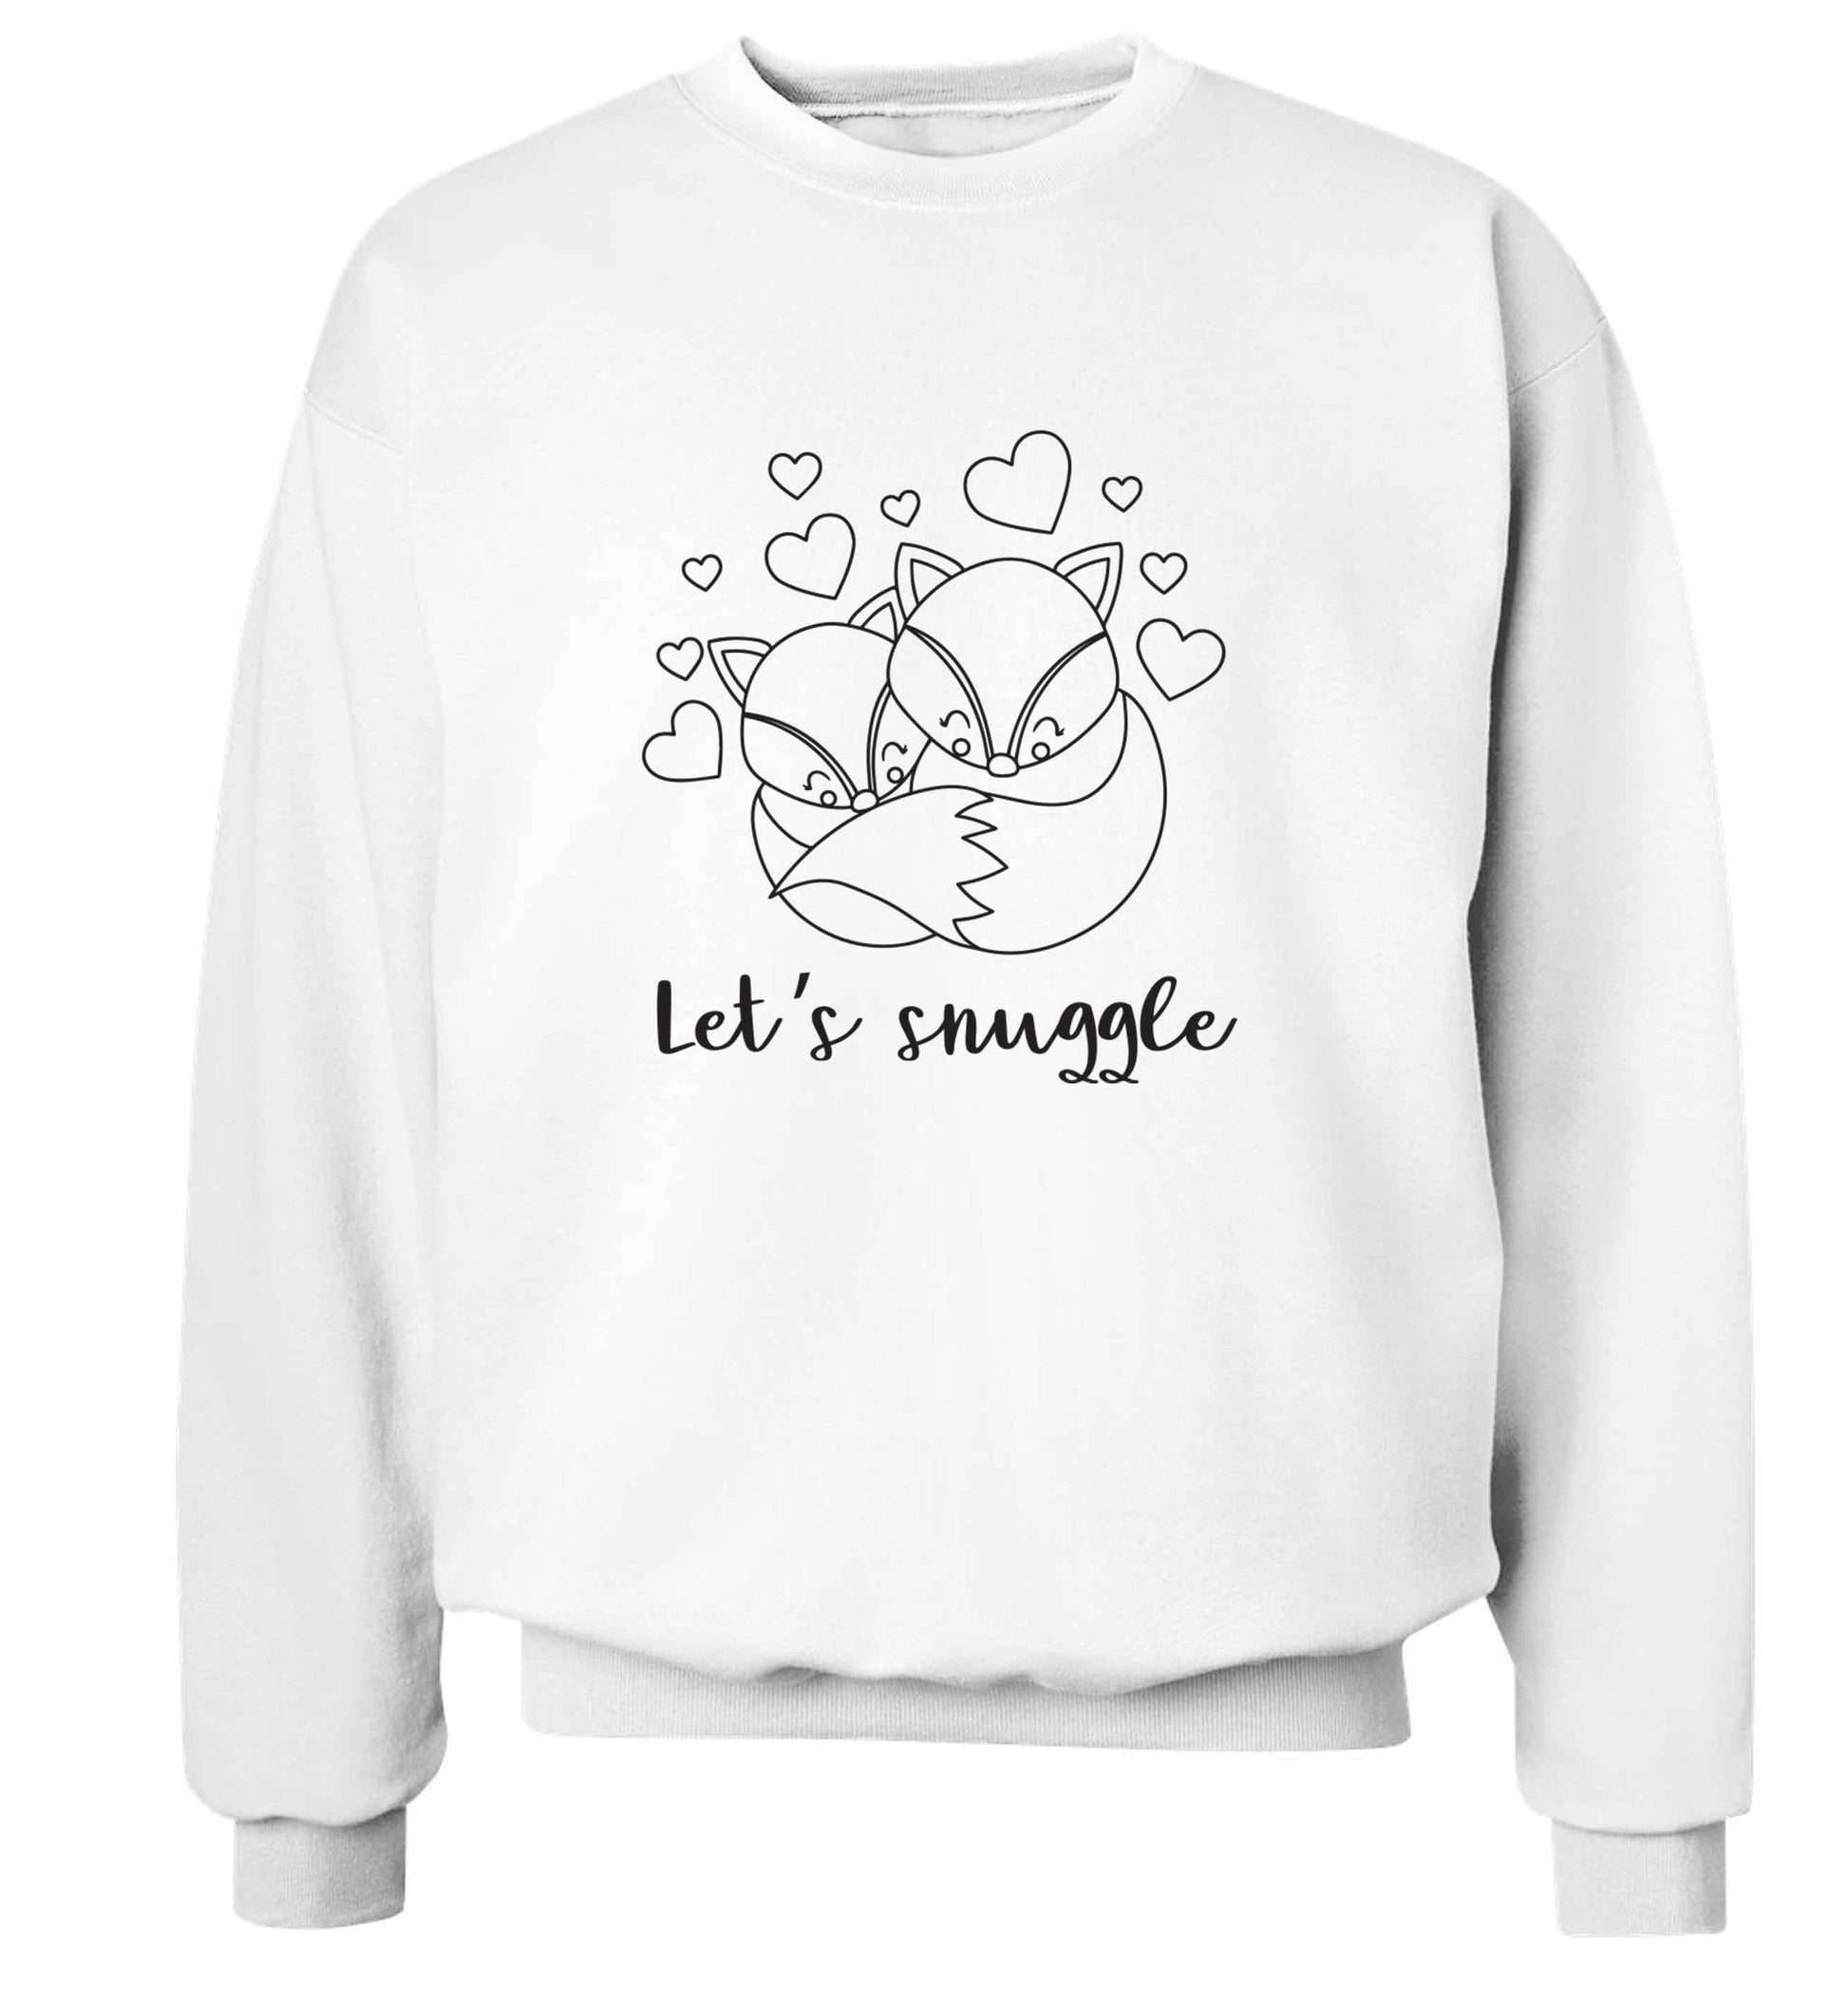 Let's snuggle adult's unisex white sweater 2XL